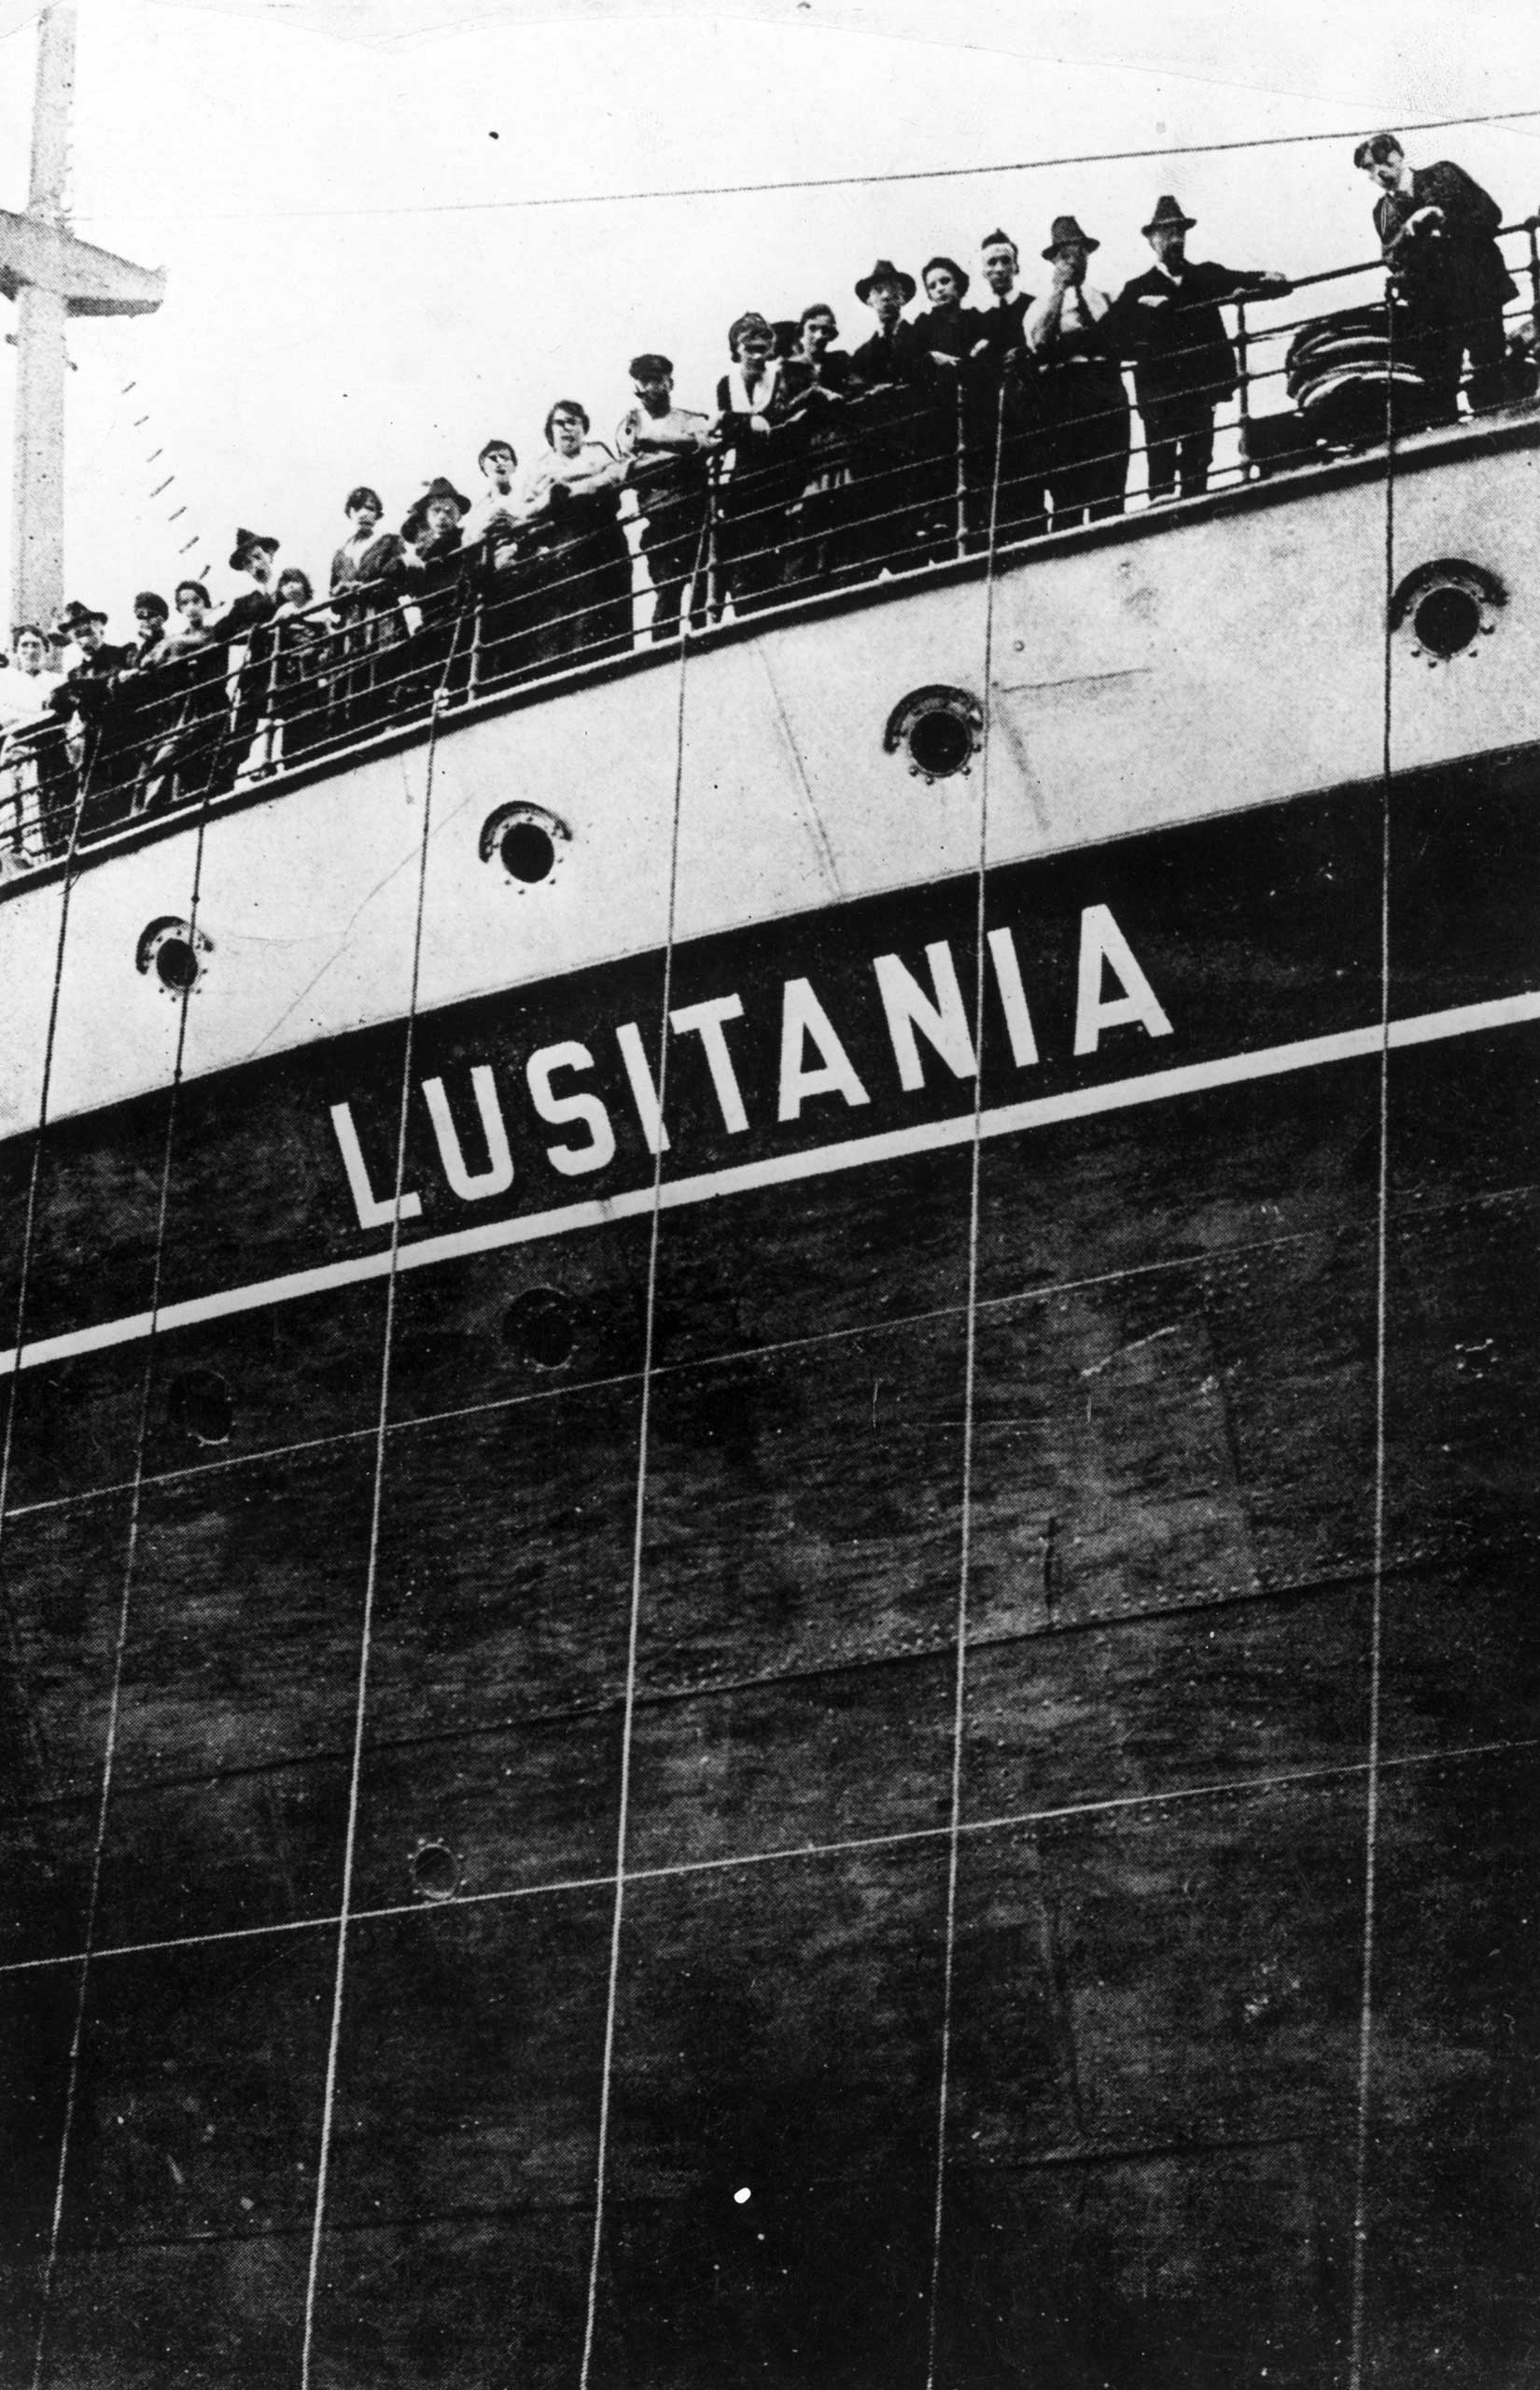 Extras line the deck of the huge set built to represent the ill-fated steamship 'Lusitania' for the silent film 'The Sinking of the Lusitania'.